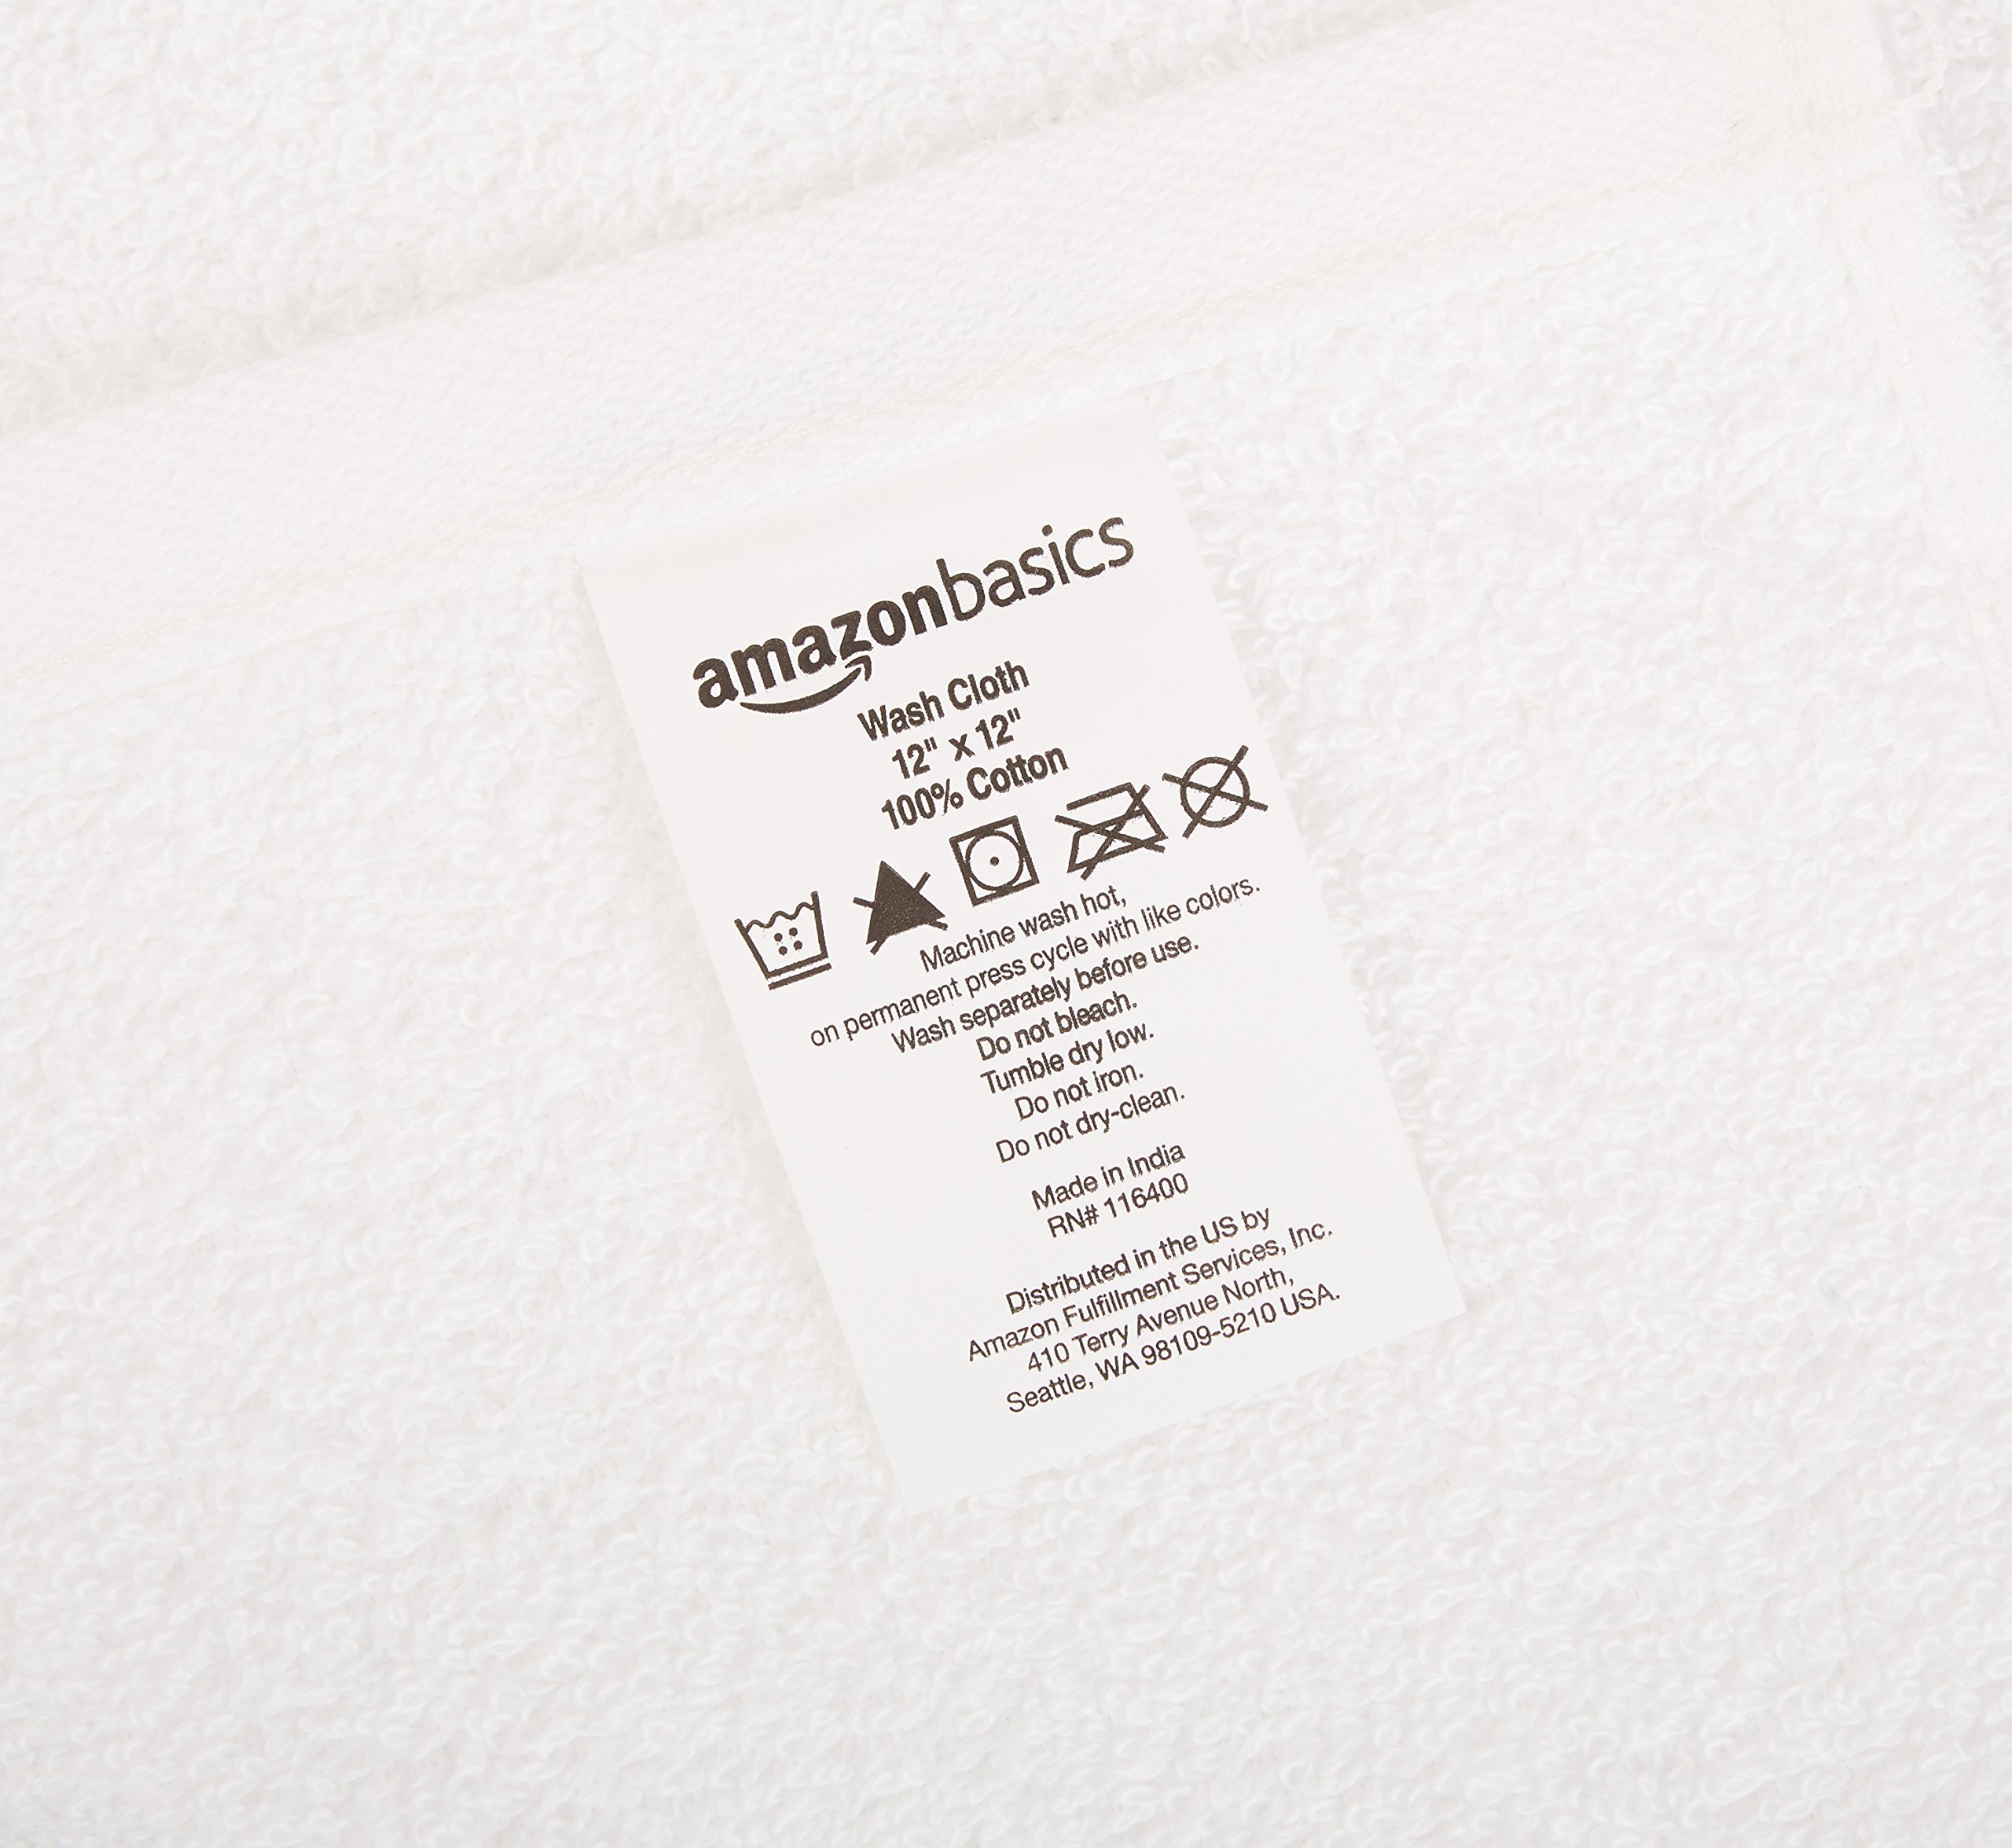 Amazon Basics Fast Drying Bath Towel, Extra Absorbent, Terry Cotton Washcloth, 12 x 12 Inch, White - Pack of 24